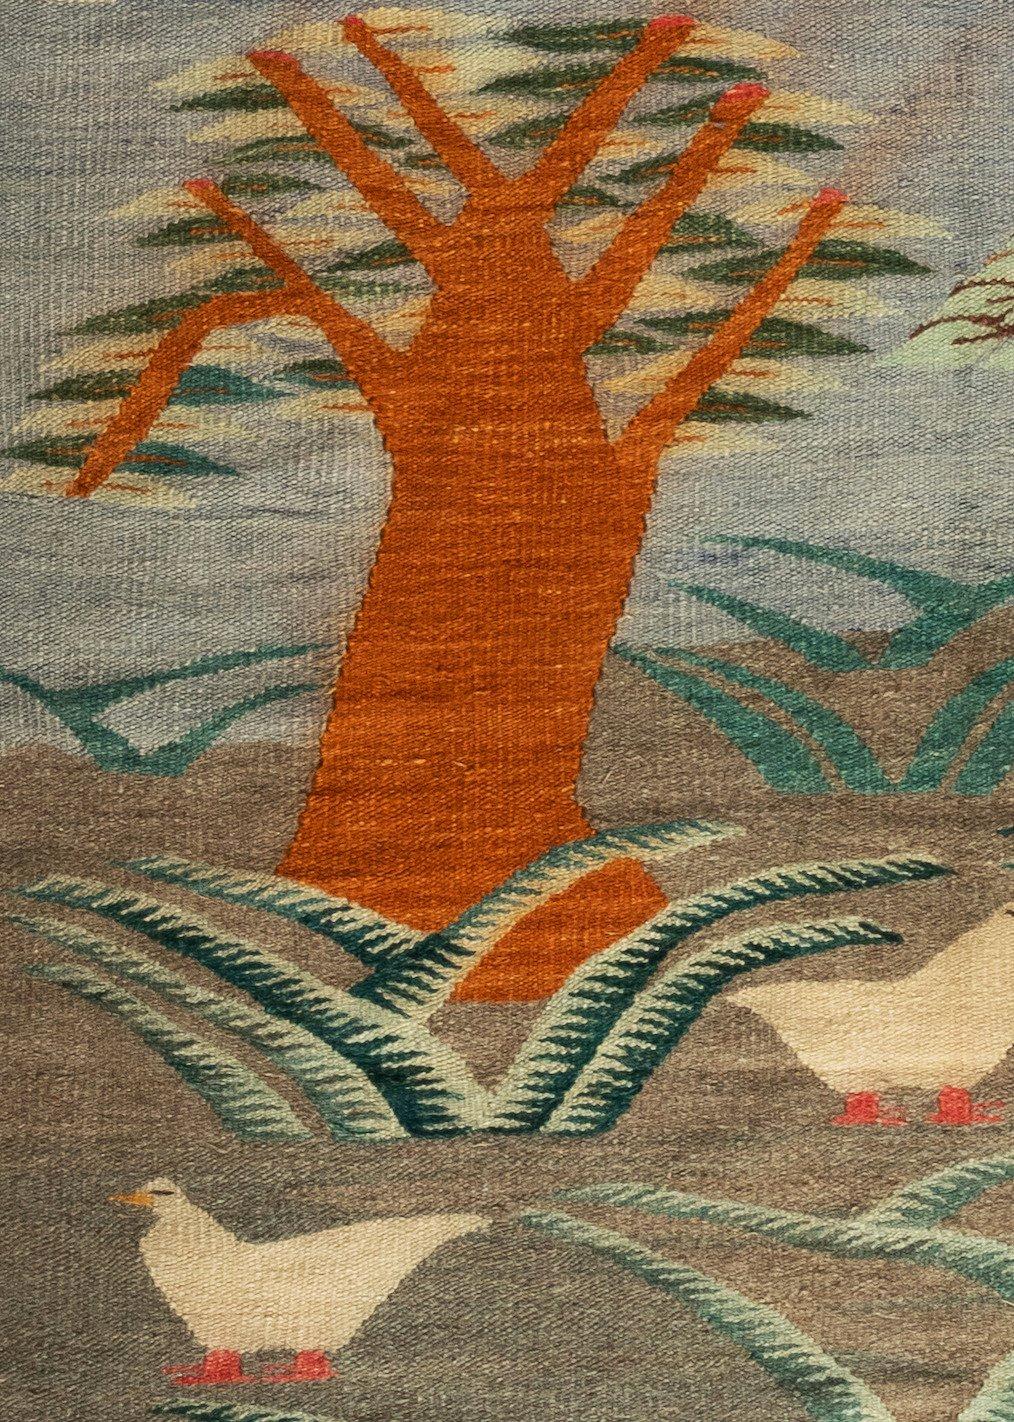 Antique native American Navajo landscape weaving with birds and sunset, circa 1930s. Measuring 4 x 6.5 ft.

From the inception of weaving by the Navajos, circa 1700, weaving has provided an important economic benefit to the tribe and a fine outlet